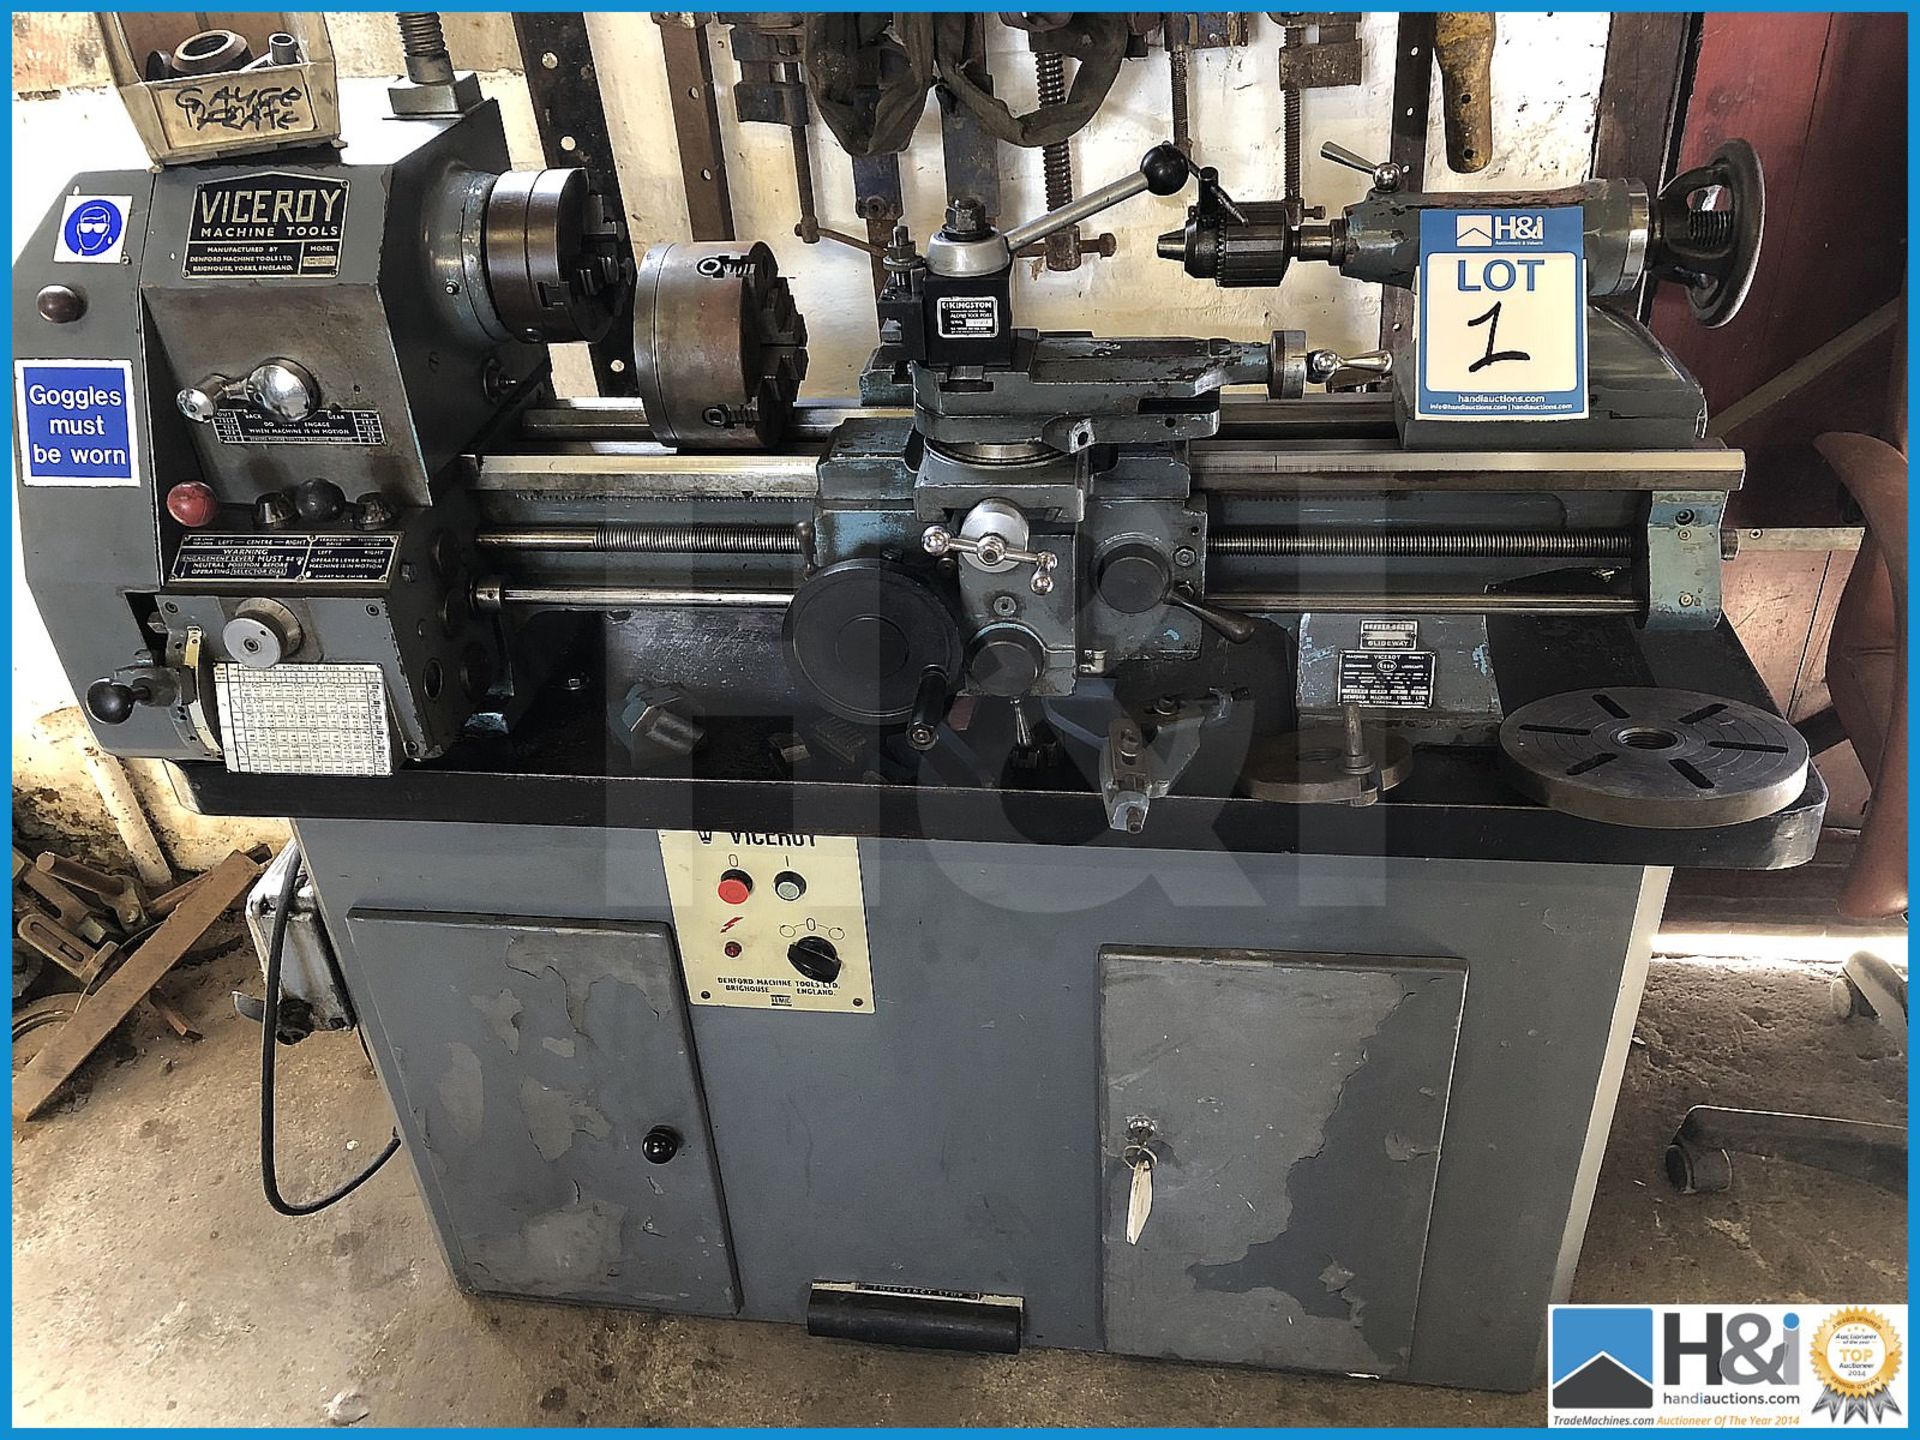 Viceroy Metric TD5 1/1G/B metalworking lathe with 2 x chucks in excellent order. 3 phase